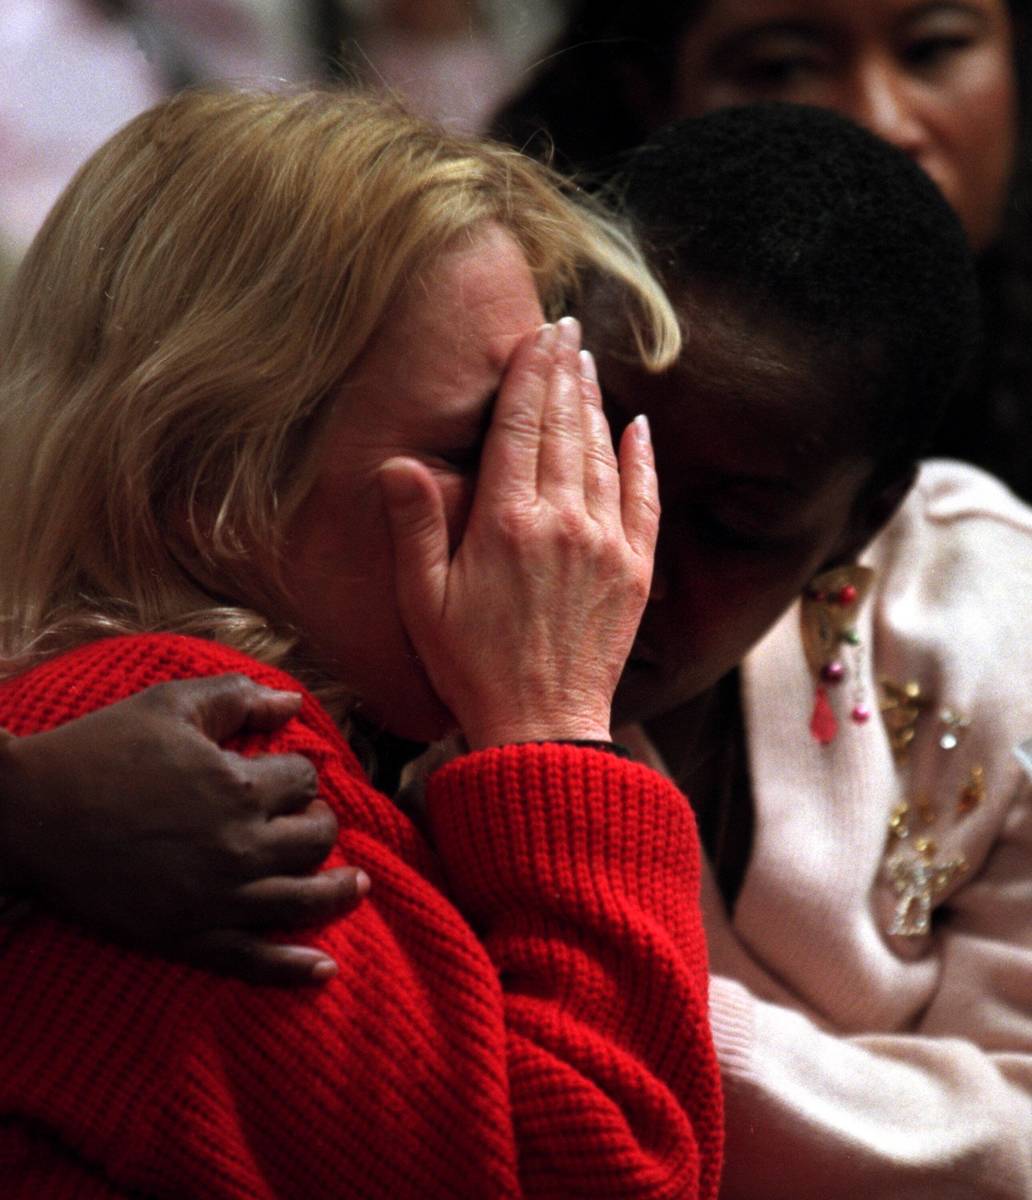 Brigitte Smith, right, comforts Joetta Burke while the prosecution show photos of their childre ...